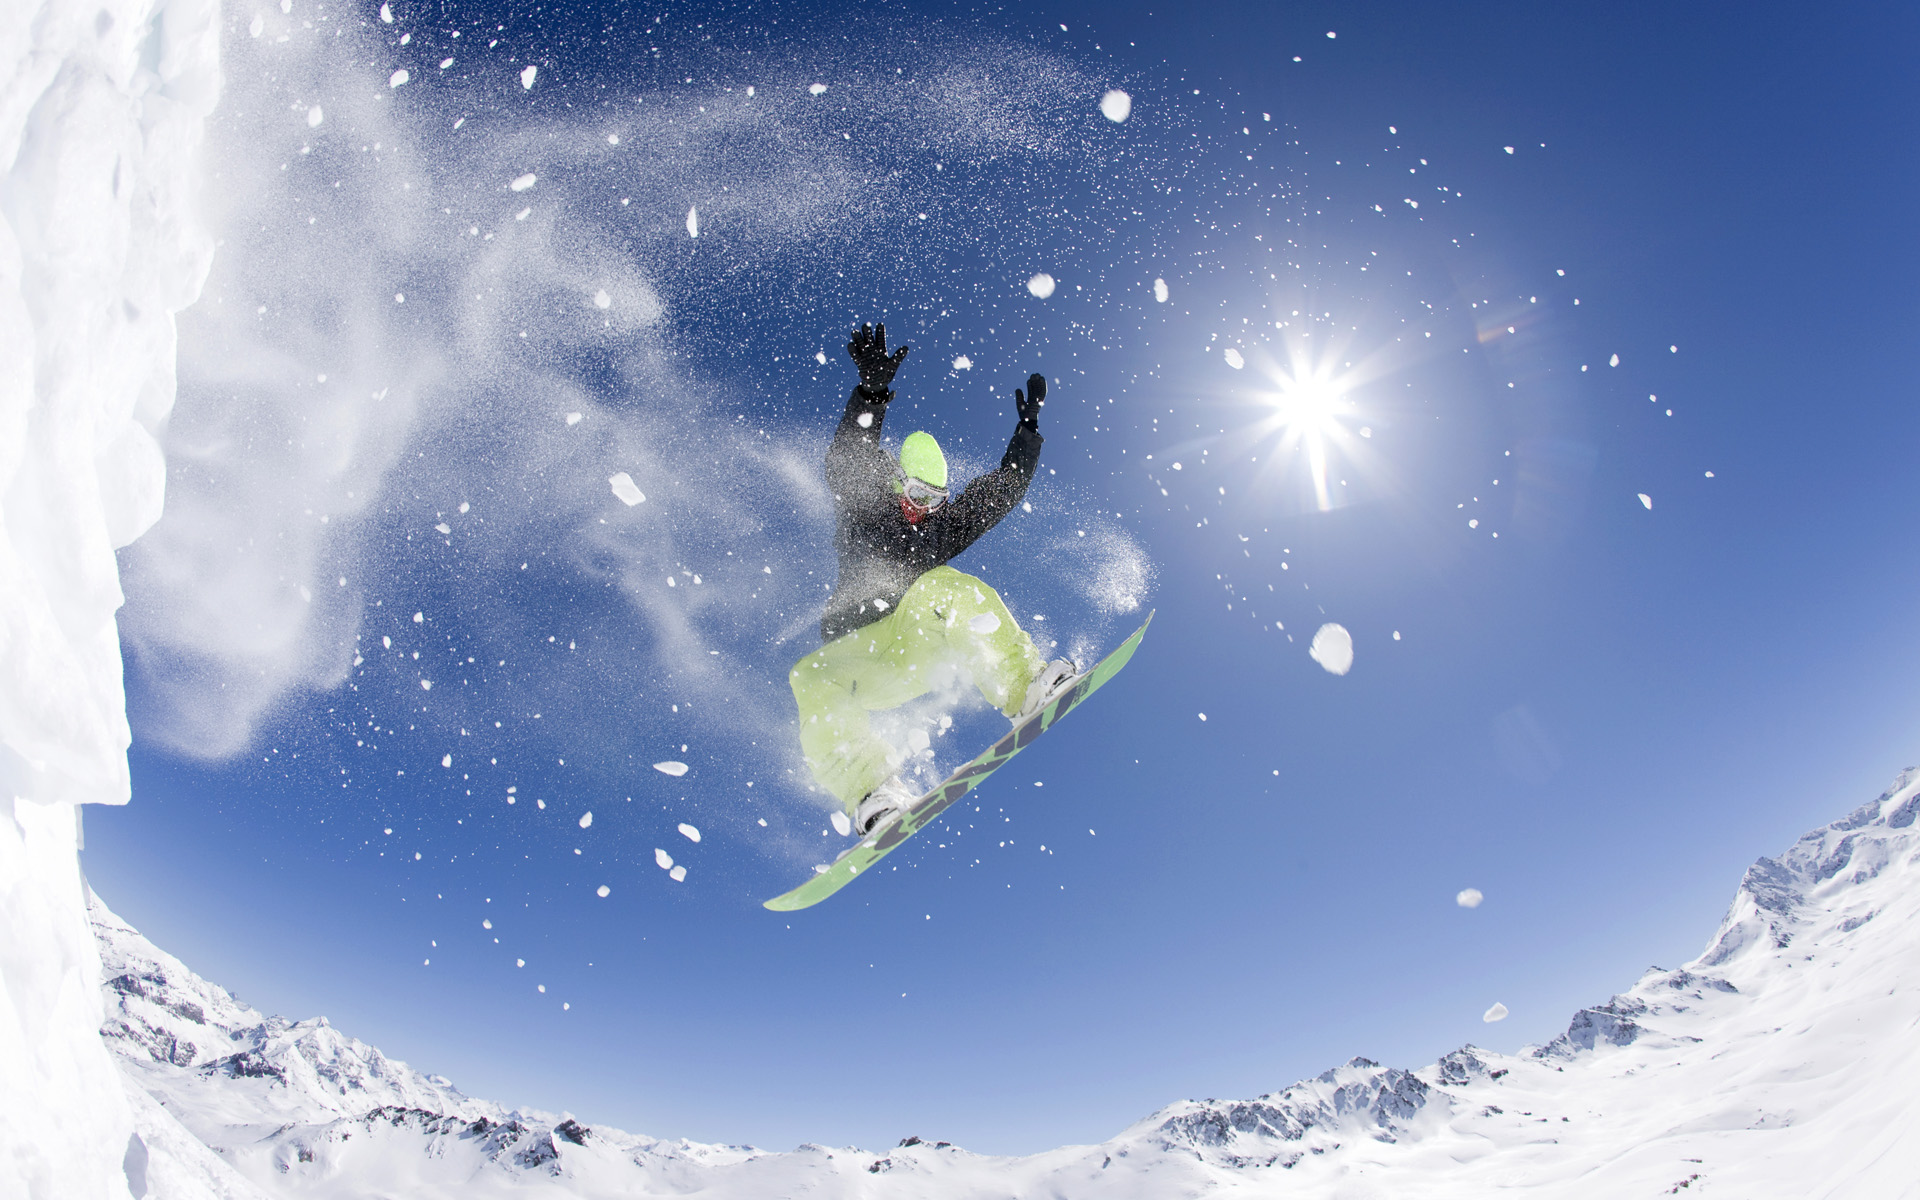 fascinating-snowboarding-wallpaper-amazing-snowboarding-wallpaper-wallpapers-hd-for-facebook-pc-mobile-free-download-desktop-iphone-android-with-quotes.jpg